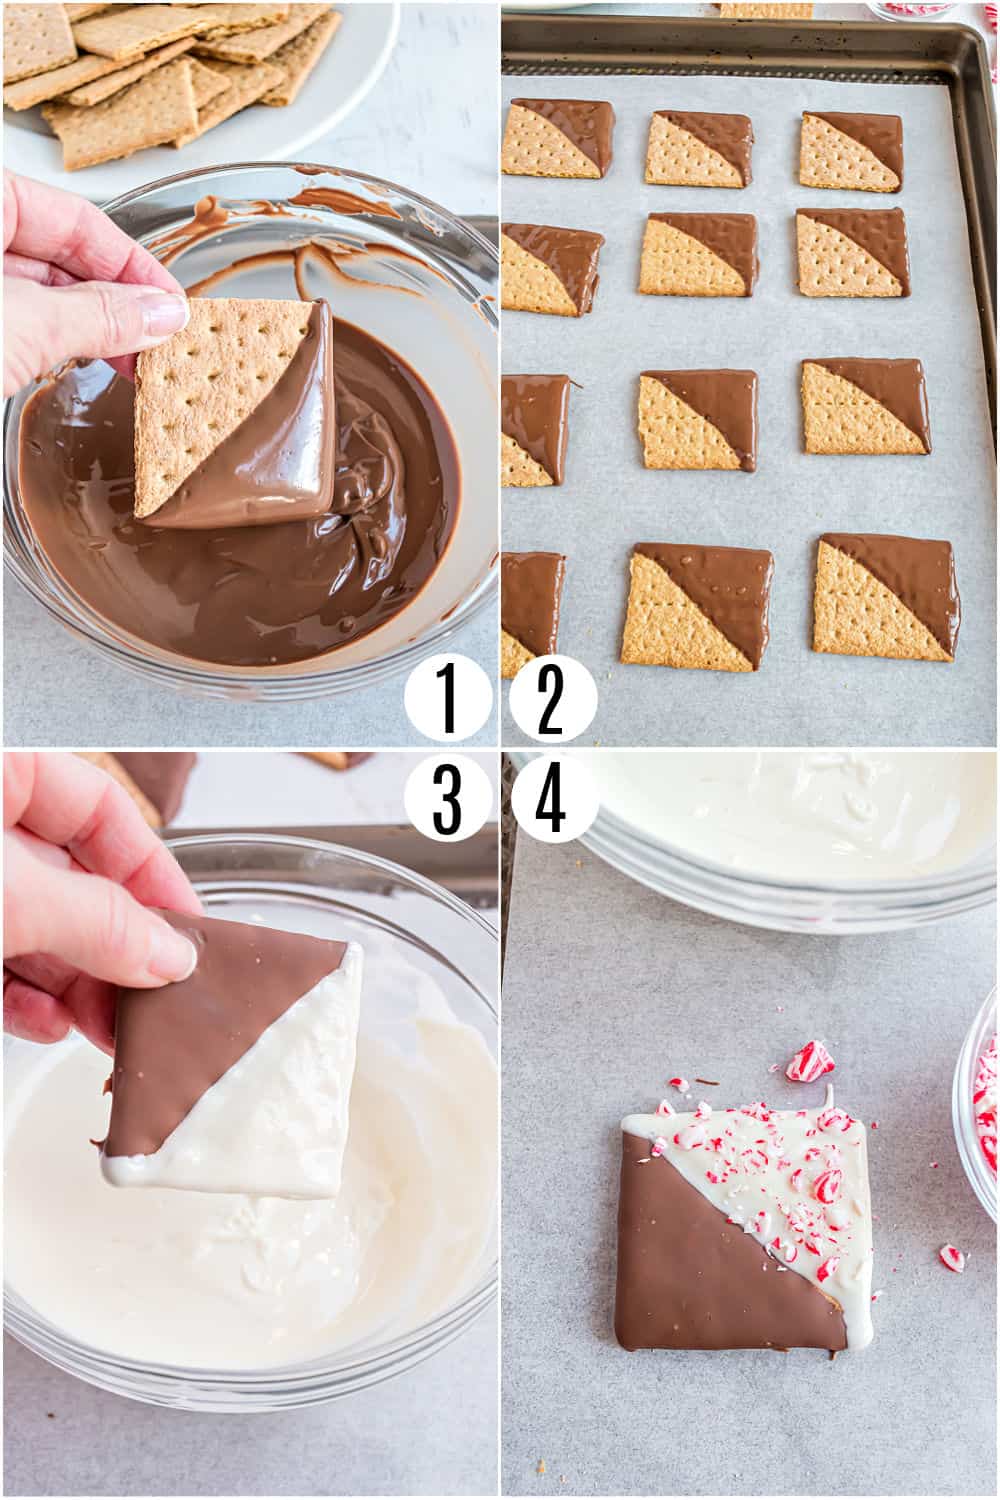 Step by step photos showing how to make chocolate peppermint grahams.